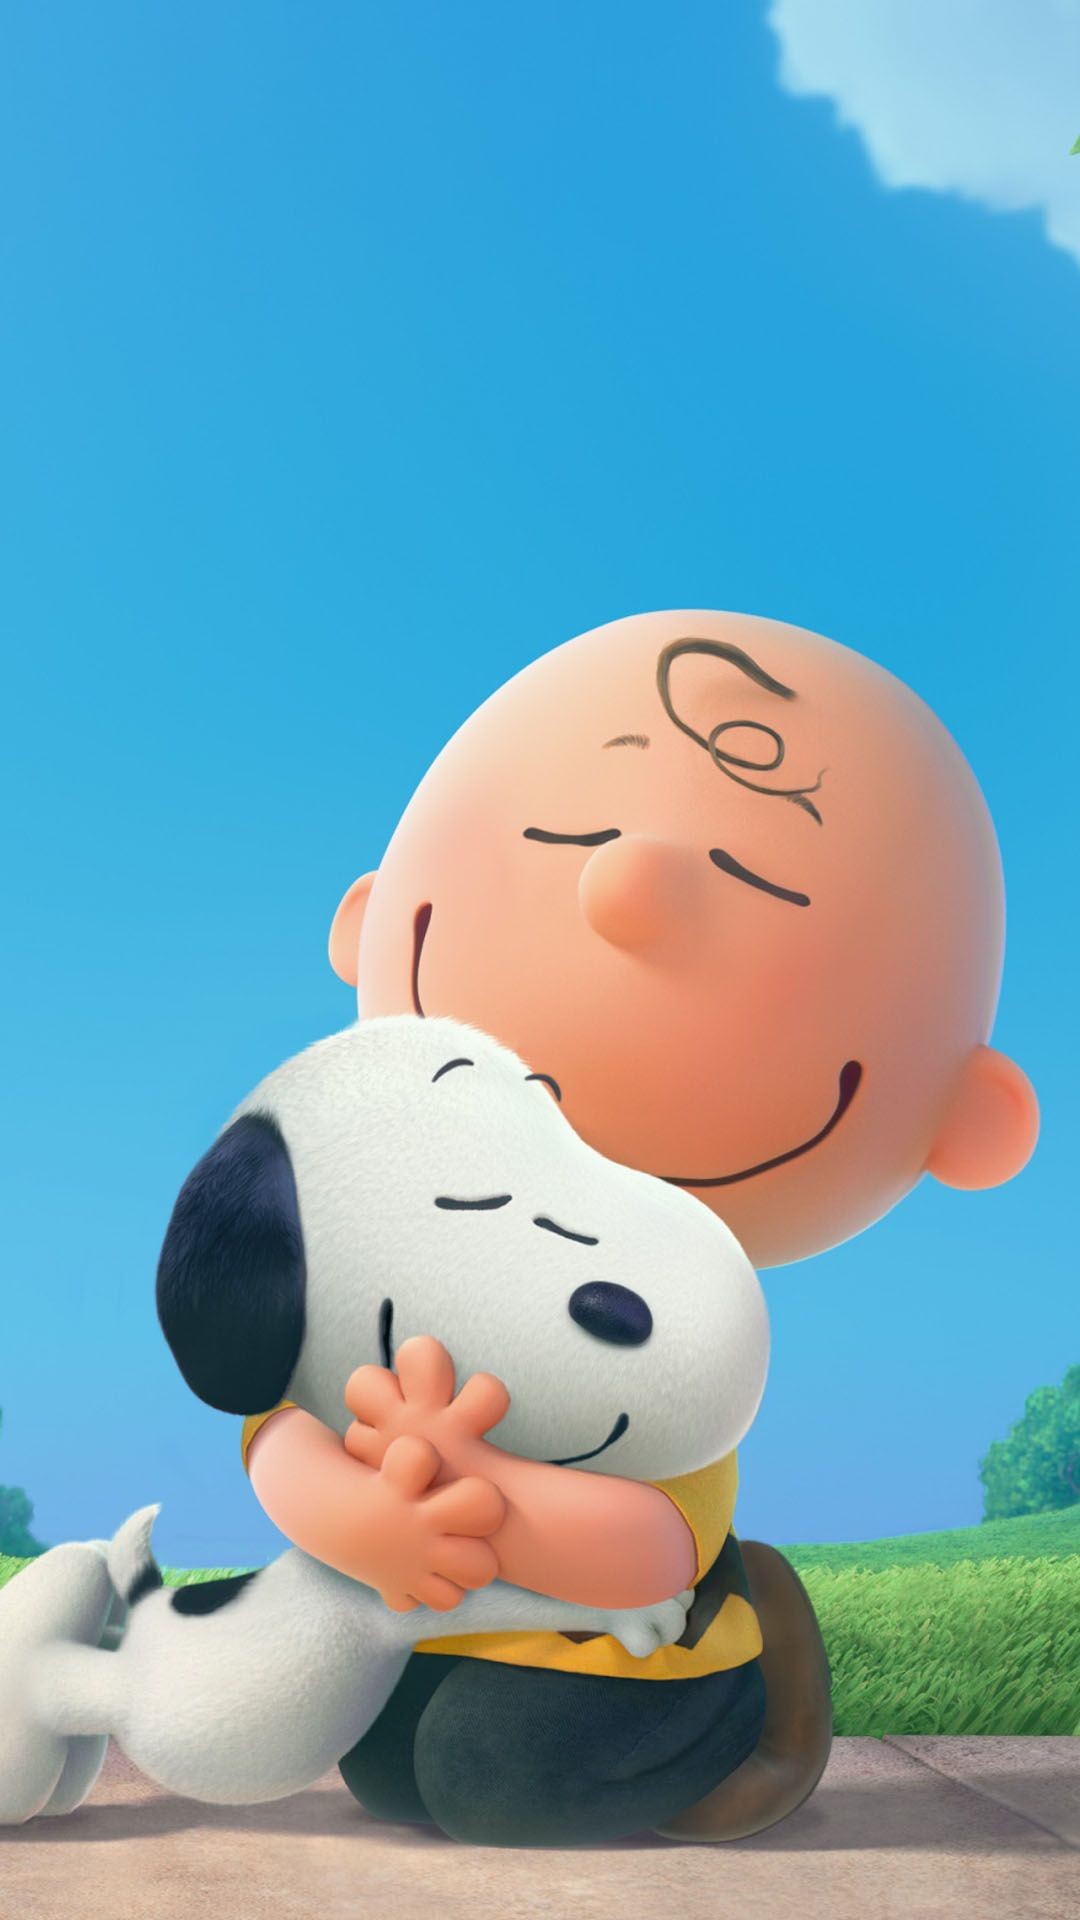 1080x1920 Peanuts Snoopy iPhone 6 / 6 Plus and iPhone 5/4 Wallpapers